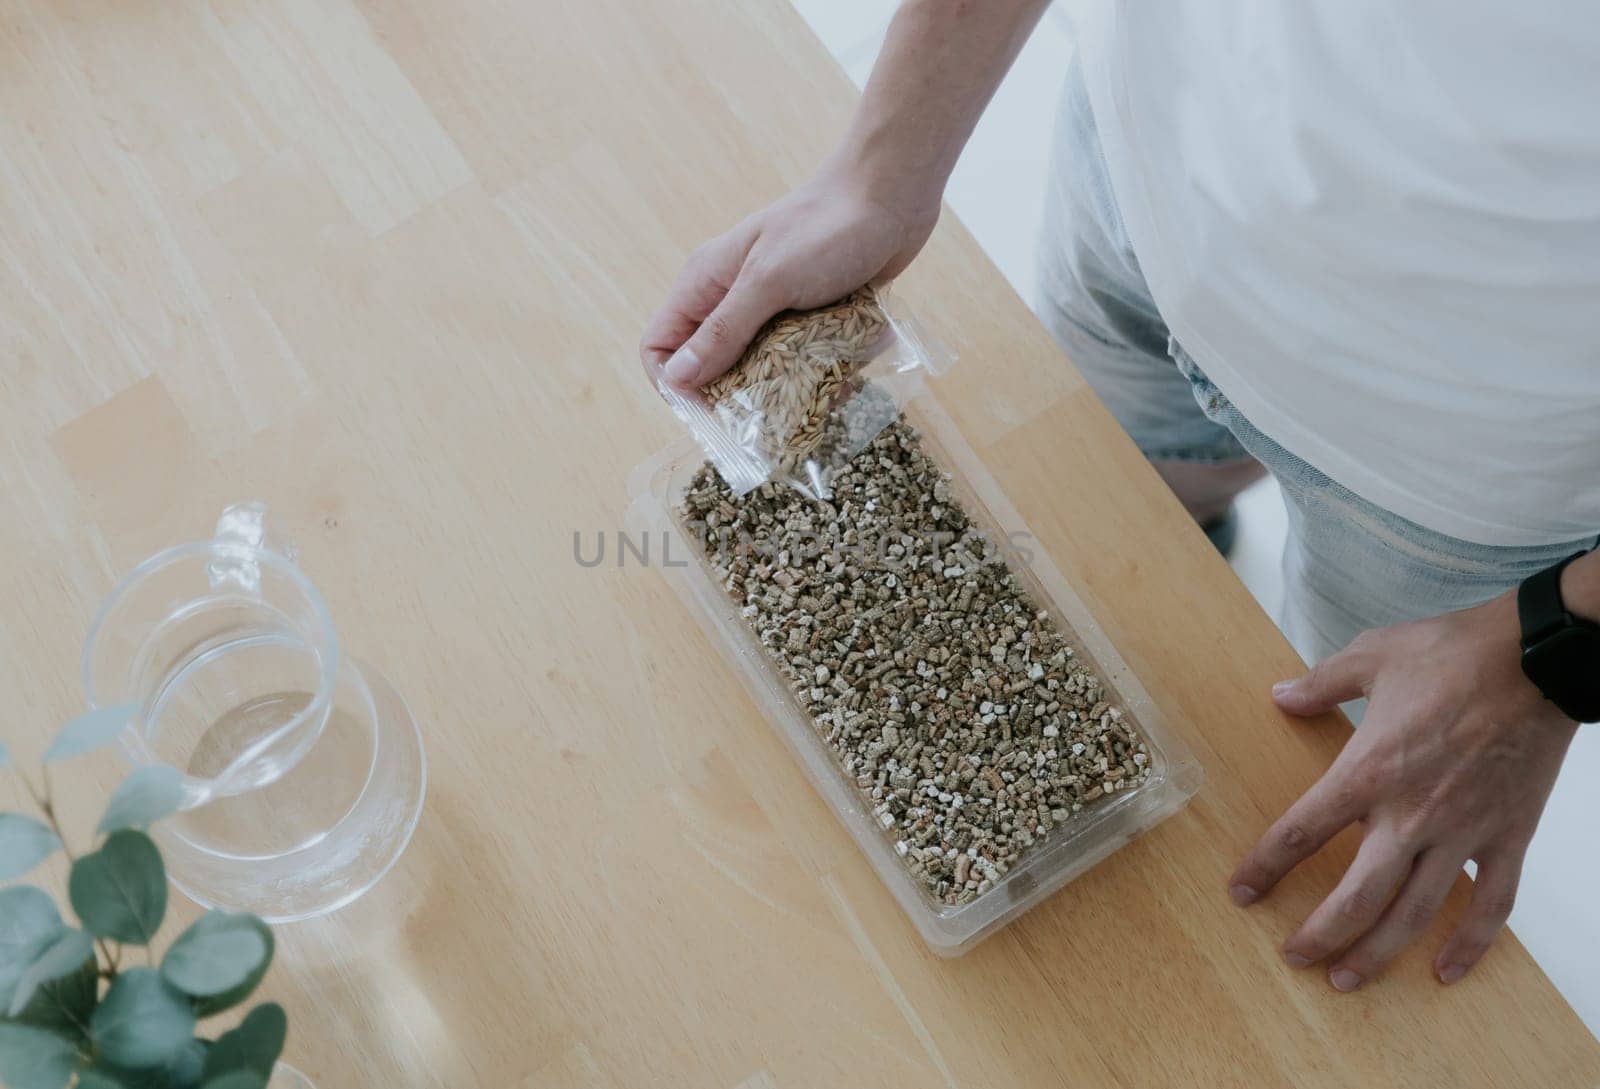 One young Caucasian unrecognizable man pours seeds from a transparent bag into a container with soil, standing in the kitchen at a wooden table, close-up top view.